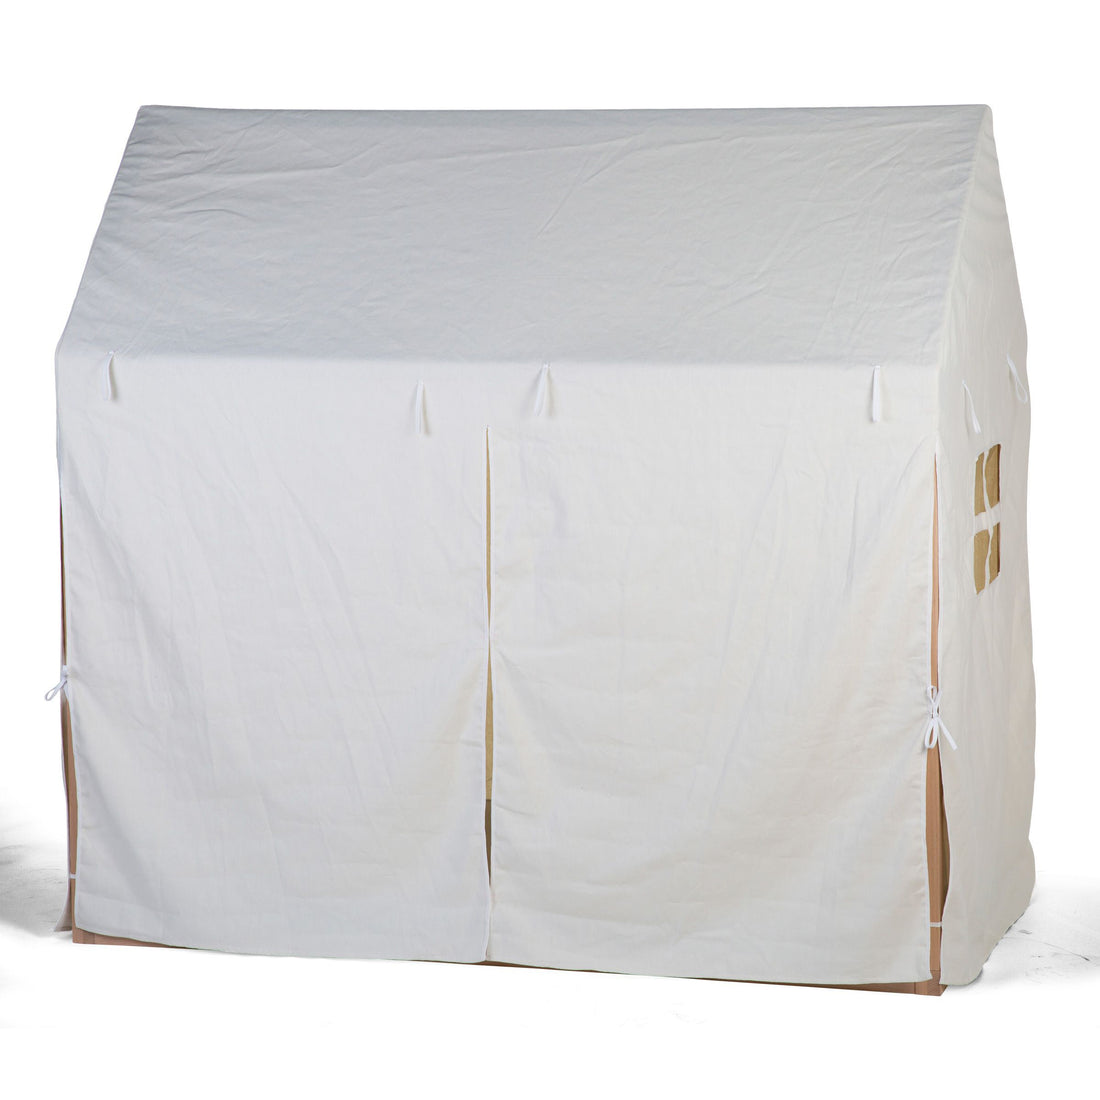 childhome-bedframe-house-cover-white- (4)